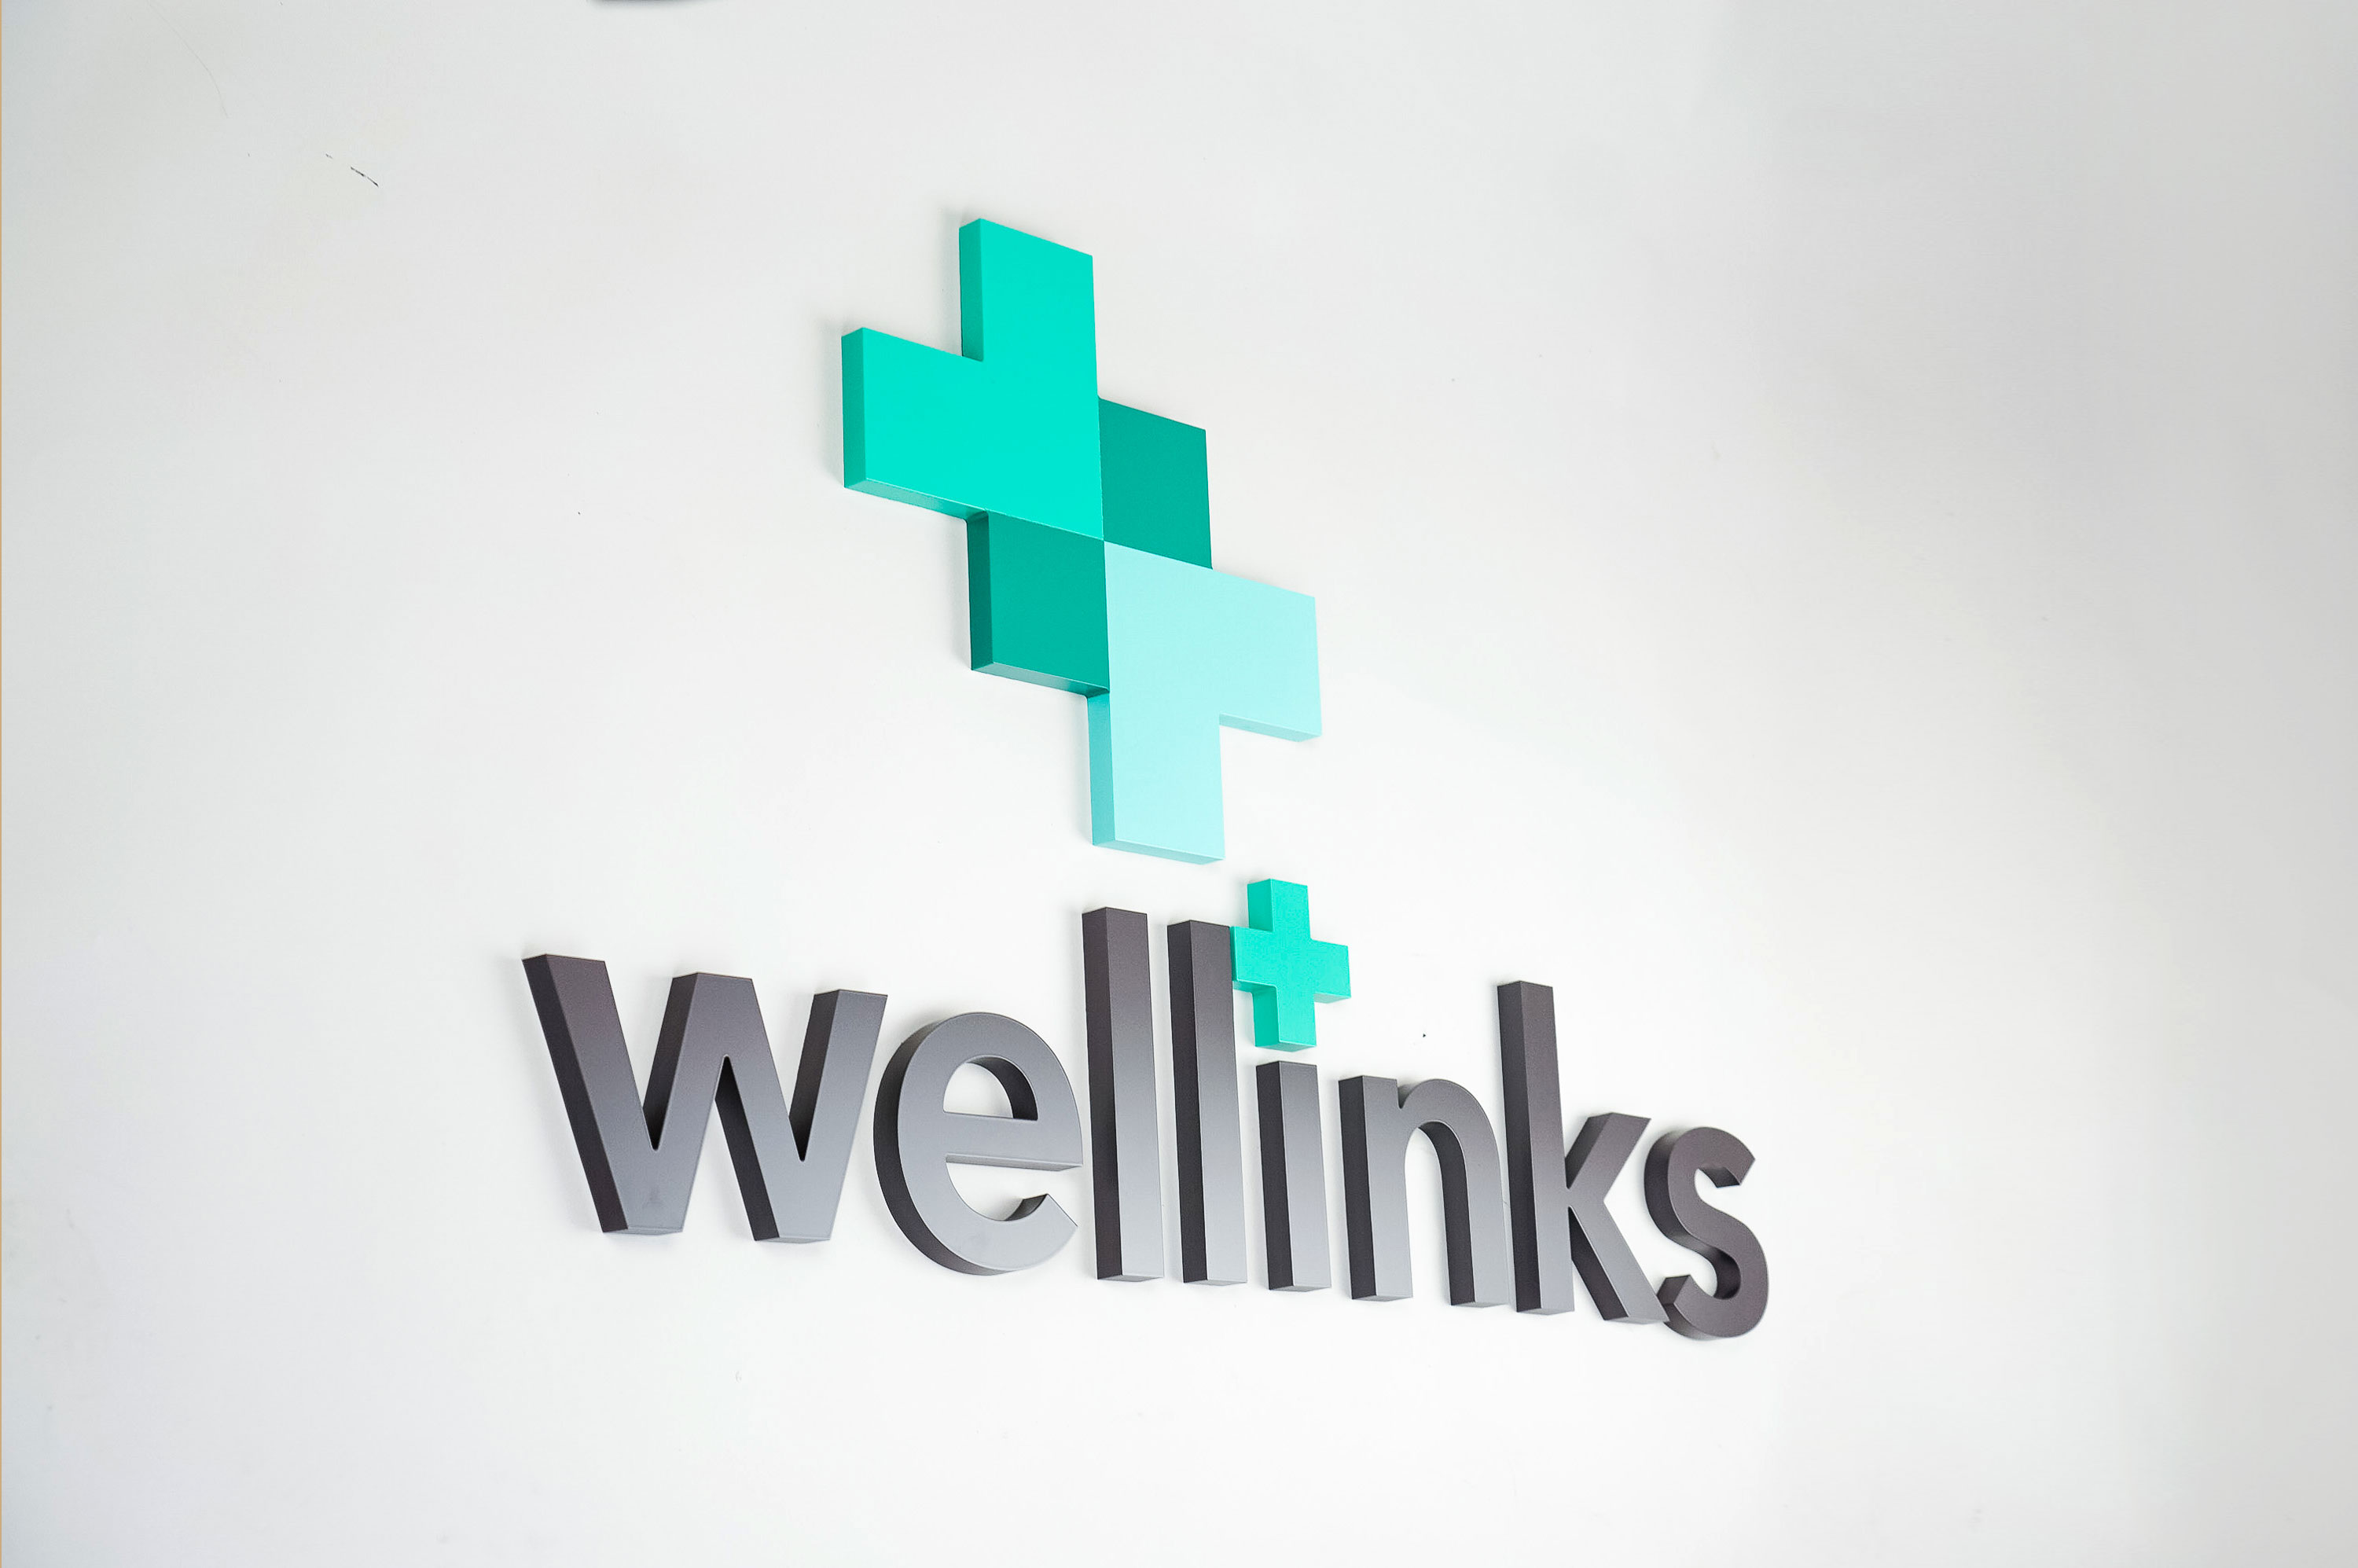 Green and grey lobby/reception logo sign for Wellinks, a wearable health technology company based in New Haven, Connecticut.